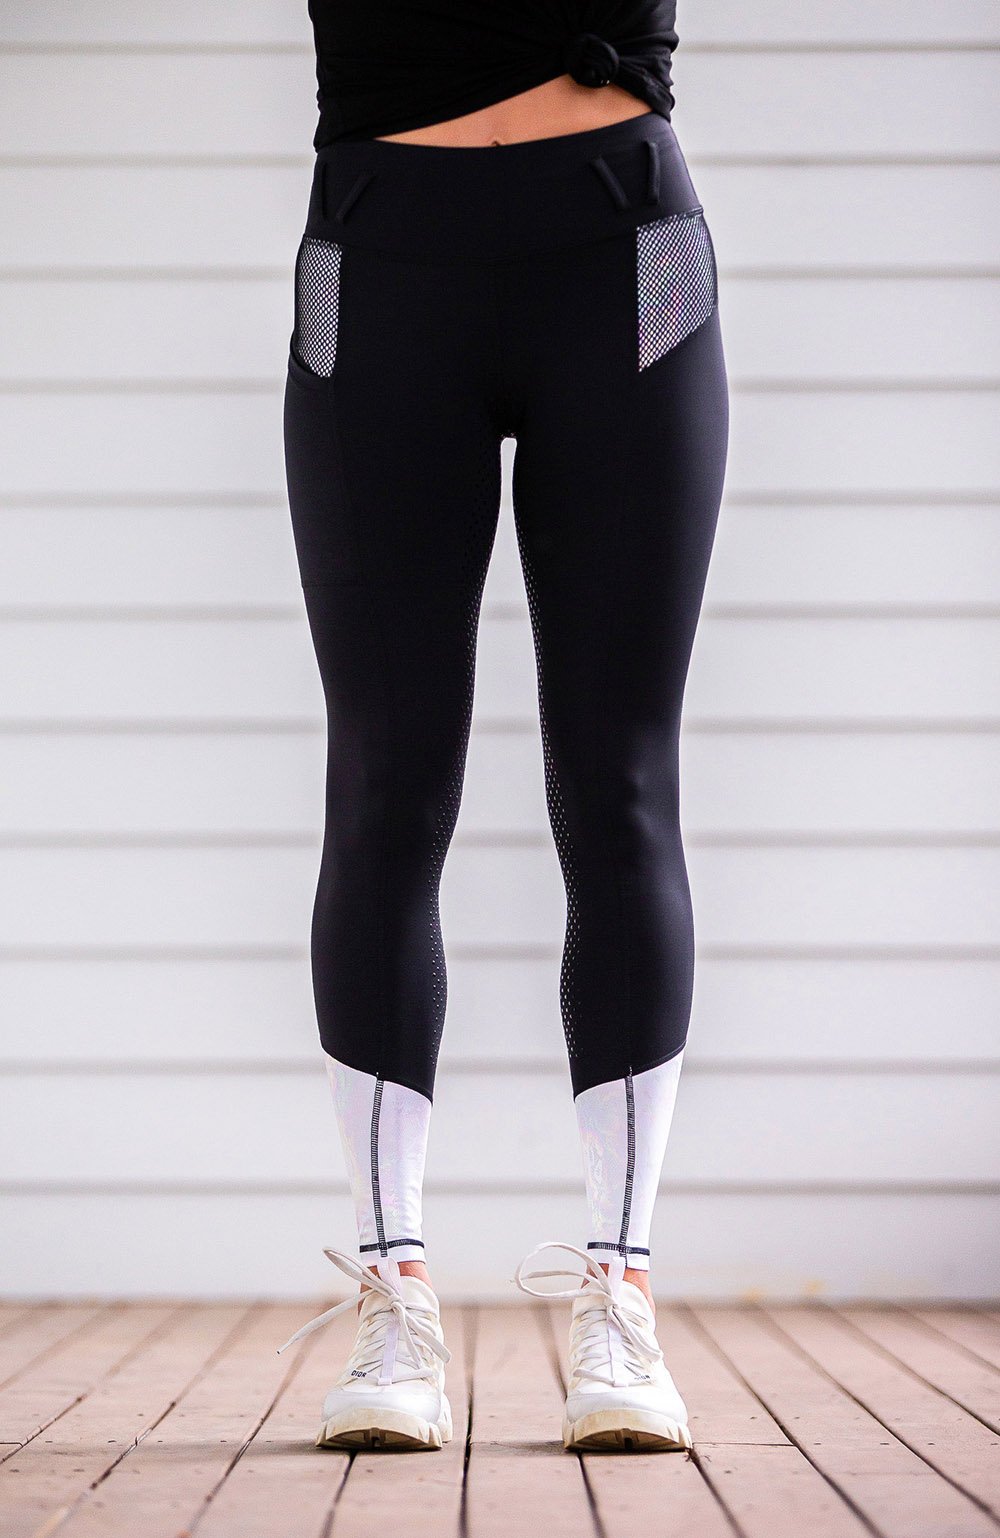 Bare Youth Performance Riding Tights - Unicorn (White Shimmer)